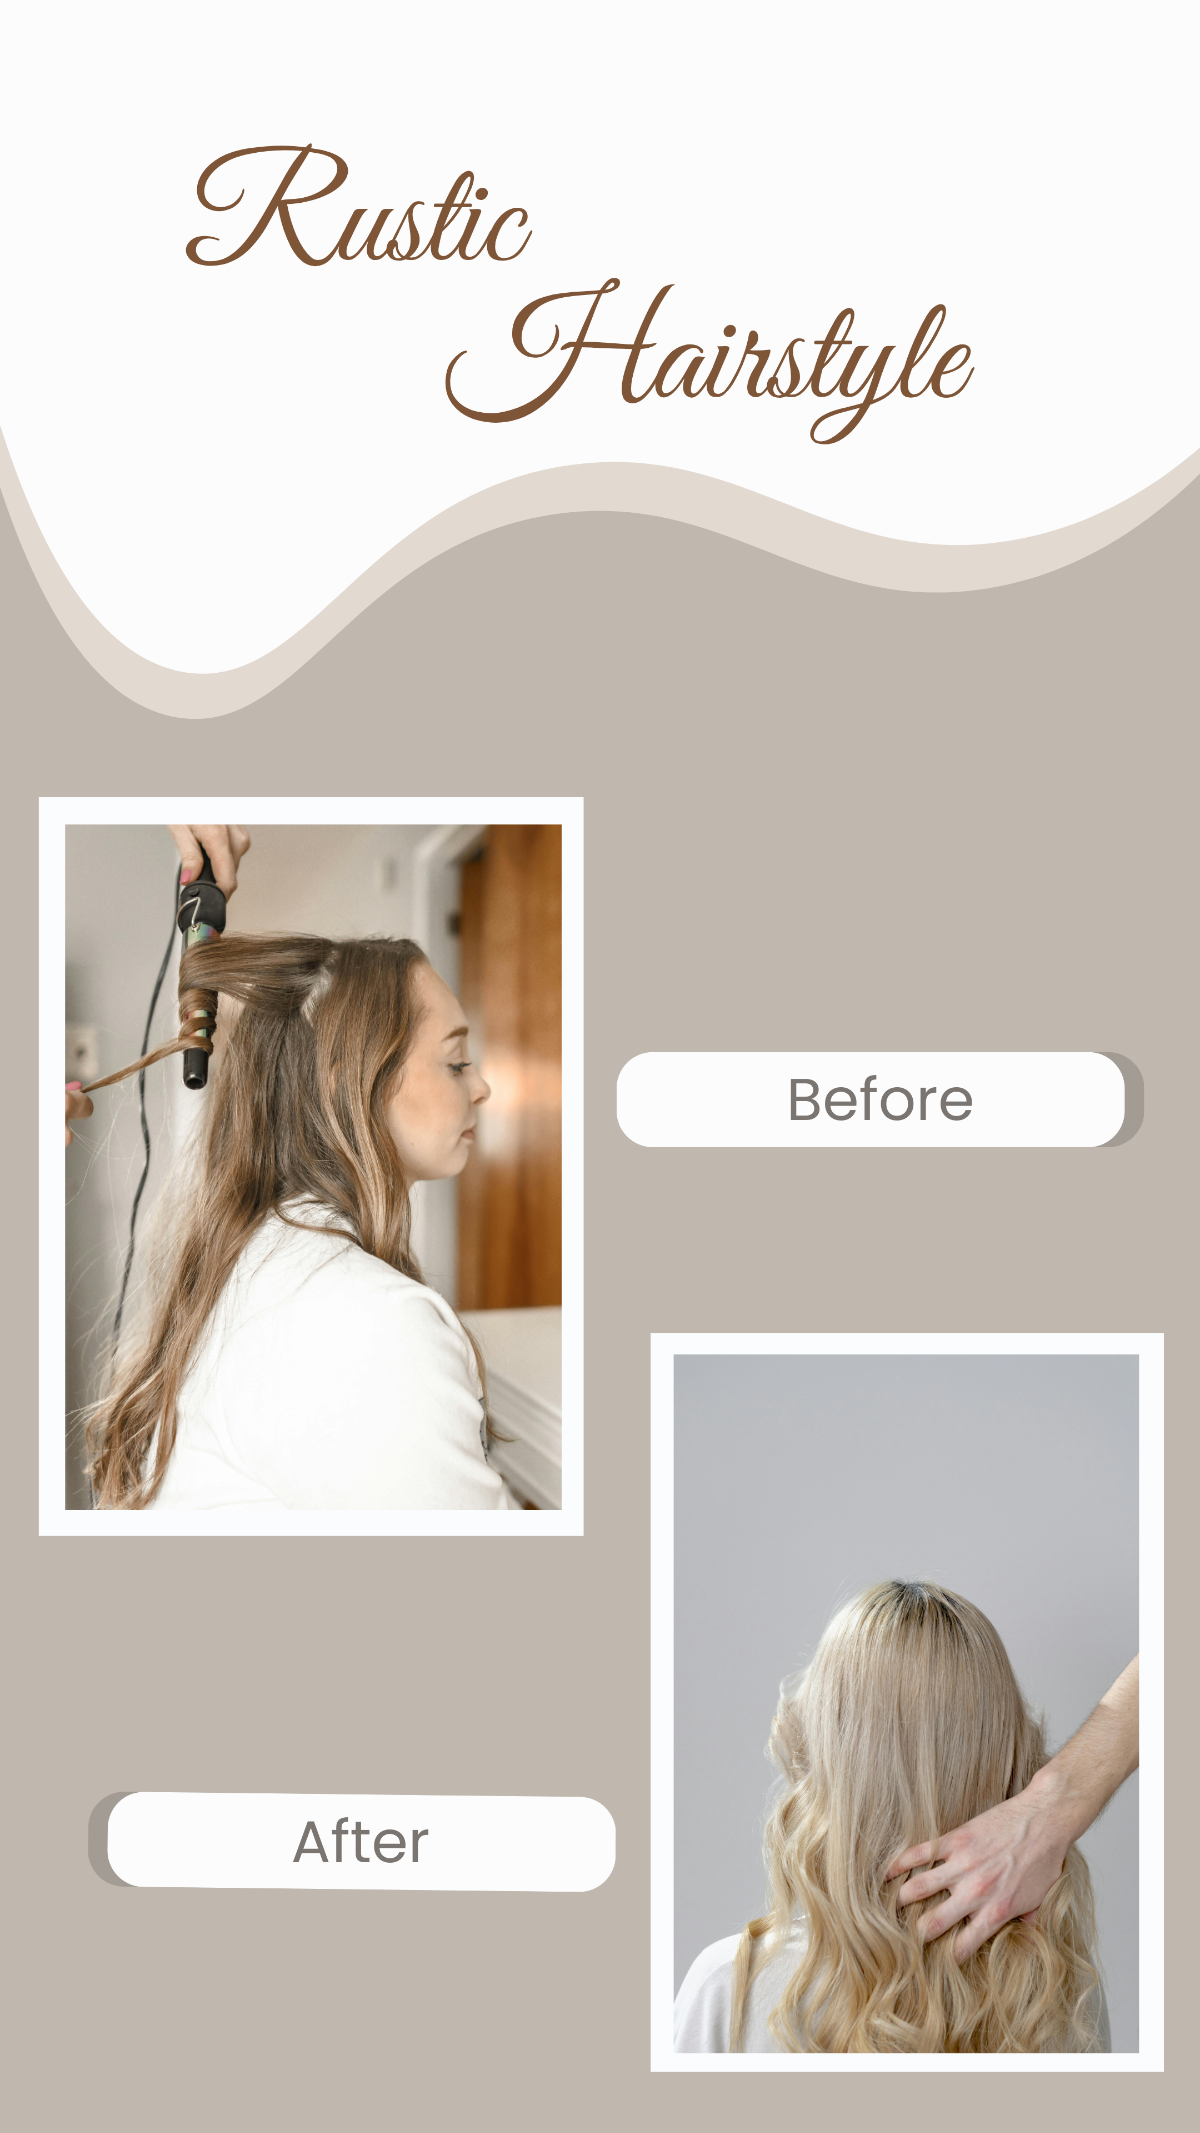 Photos Rustic Hairstyle Instagram Story